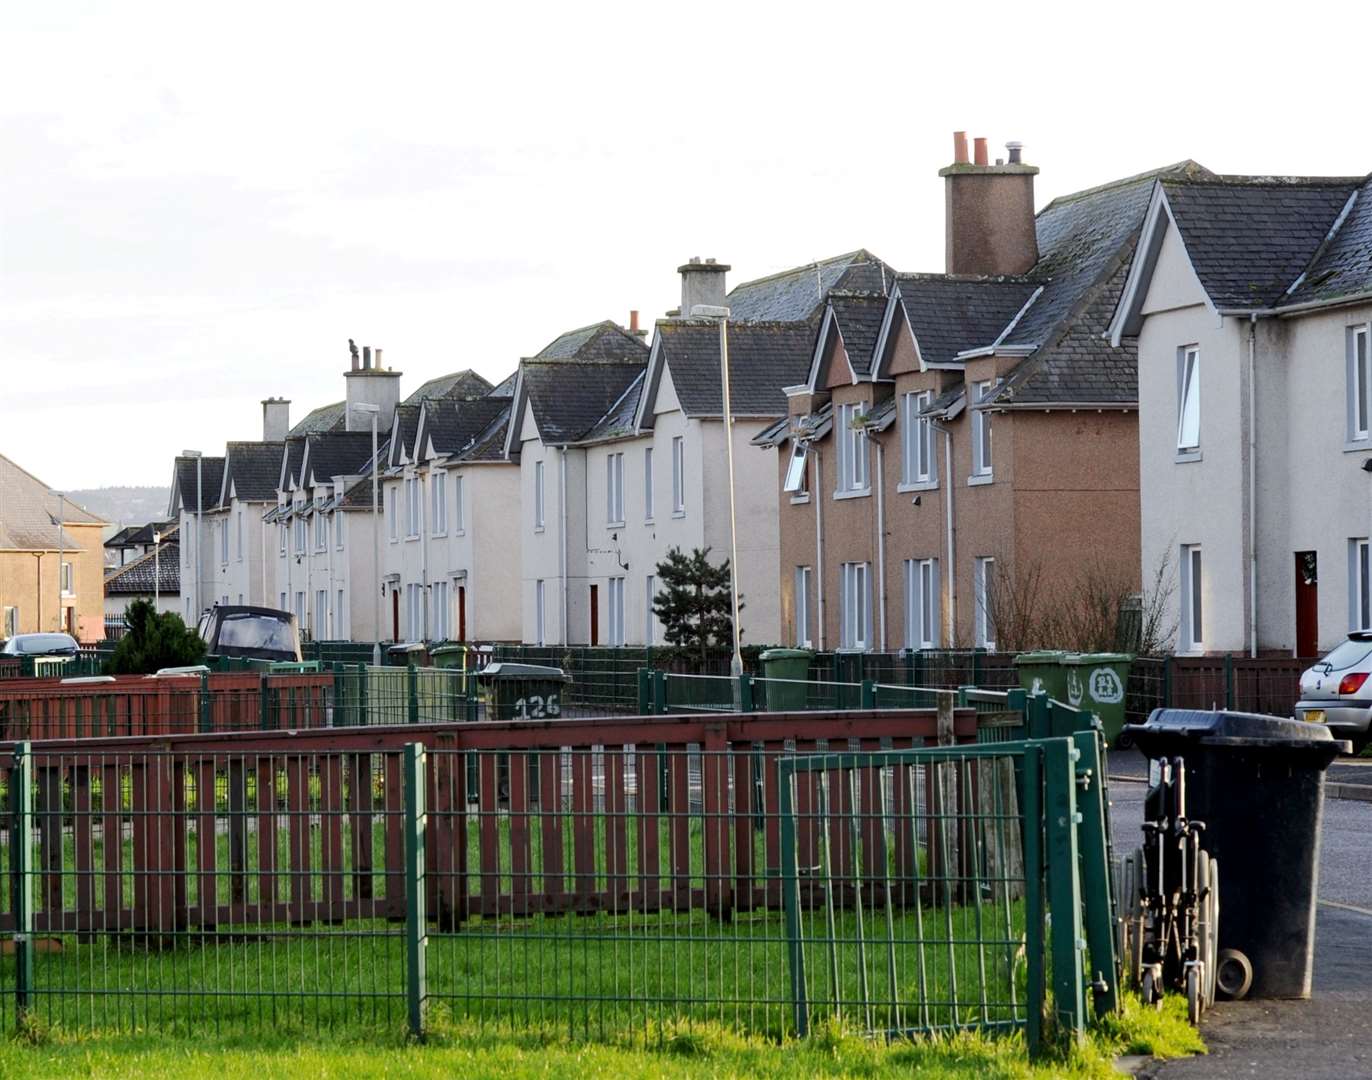 The assault took place at a house in Rosehaugh Road in Inverness.